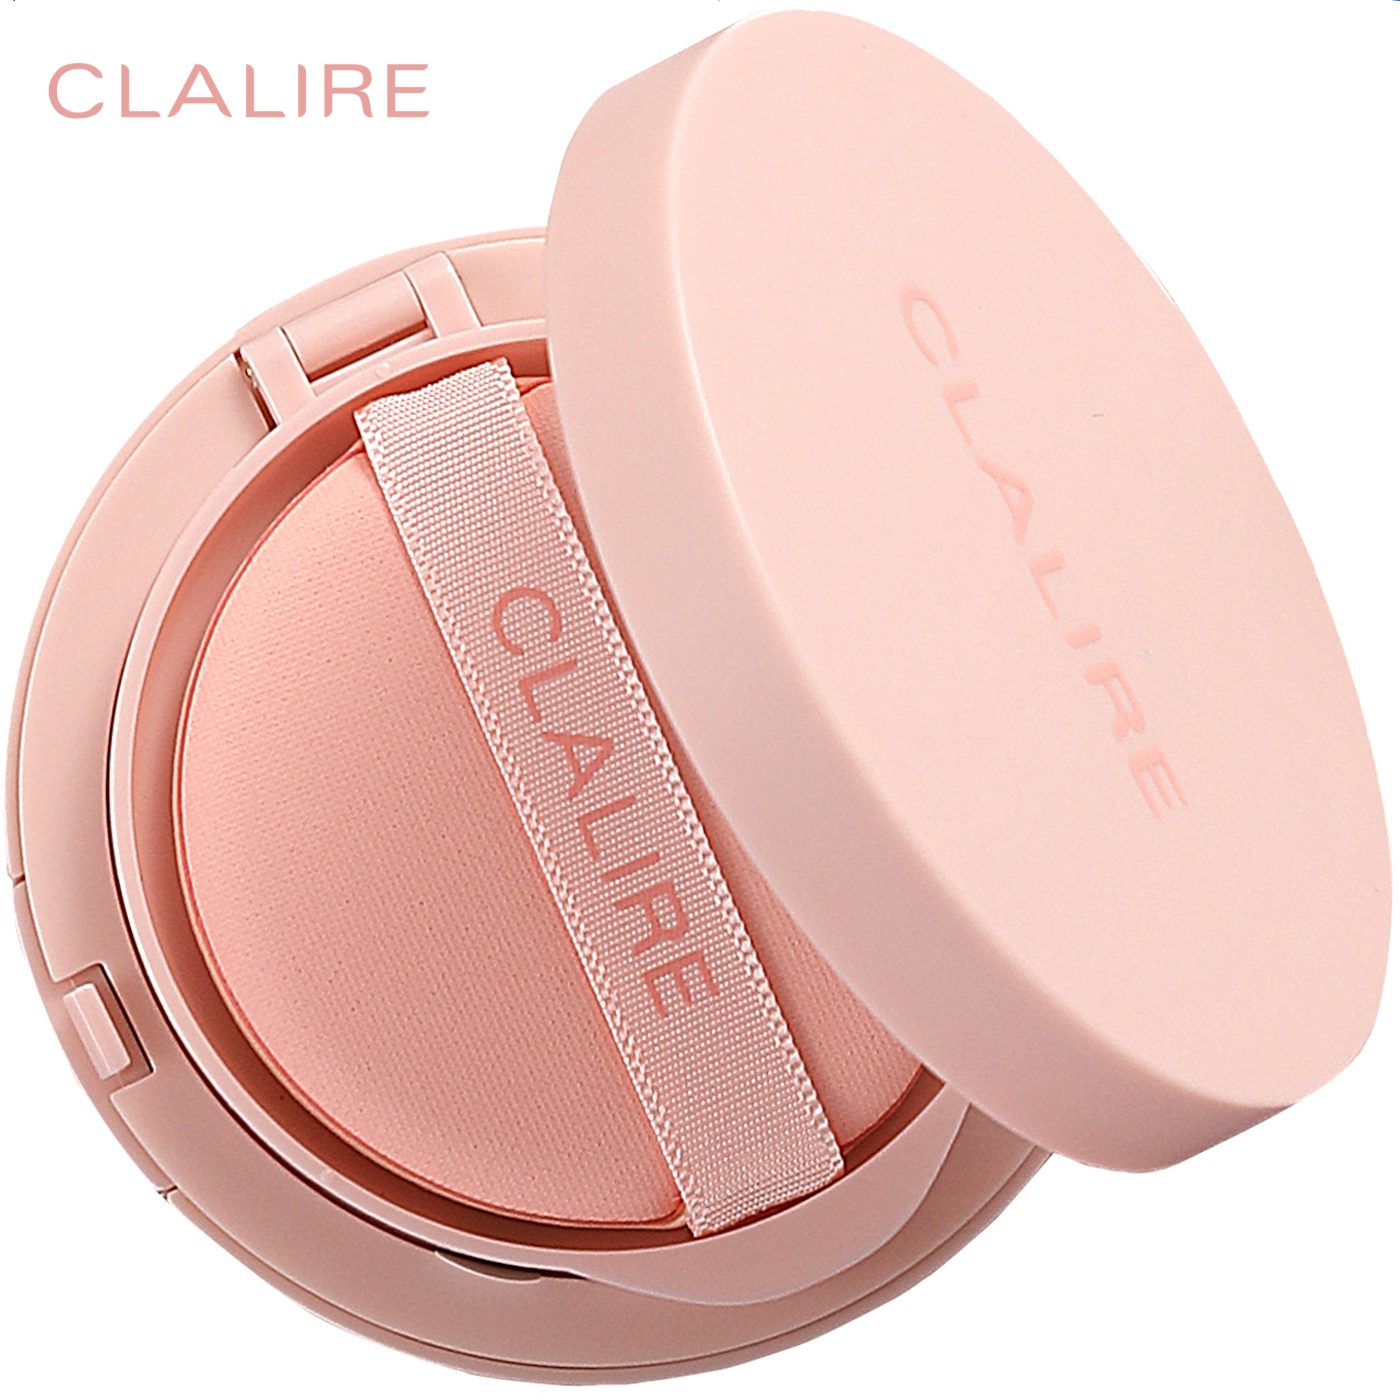 [CLALIRE] Stay Over Cushion Foundation 0.52oz(15g)/1ea, 2 colors(21N, 23N), SPF50+/ PA+++, Water Proof, Long lasting &amp; Good coverage-base make up foundation, Flower water, vegetable oil, hyaluronic acid-neutral bright beige, Korea Face Makeup, K-beauty